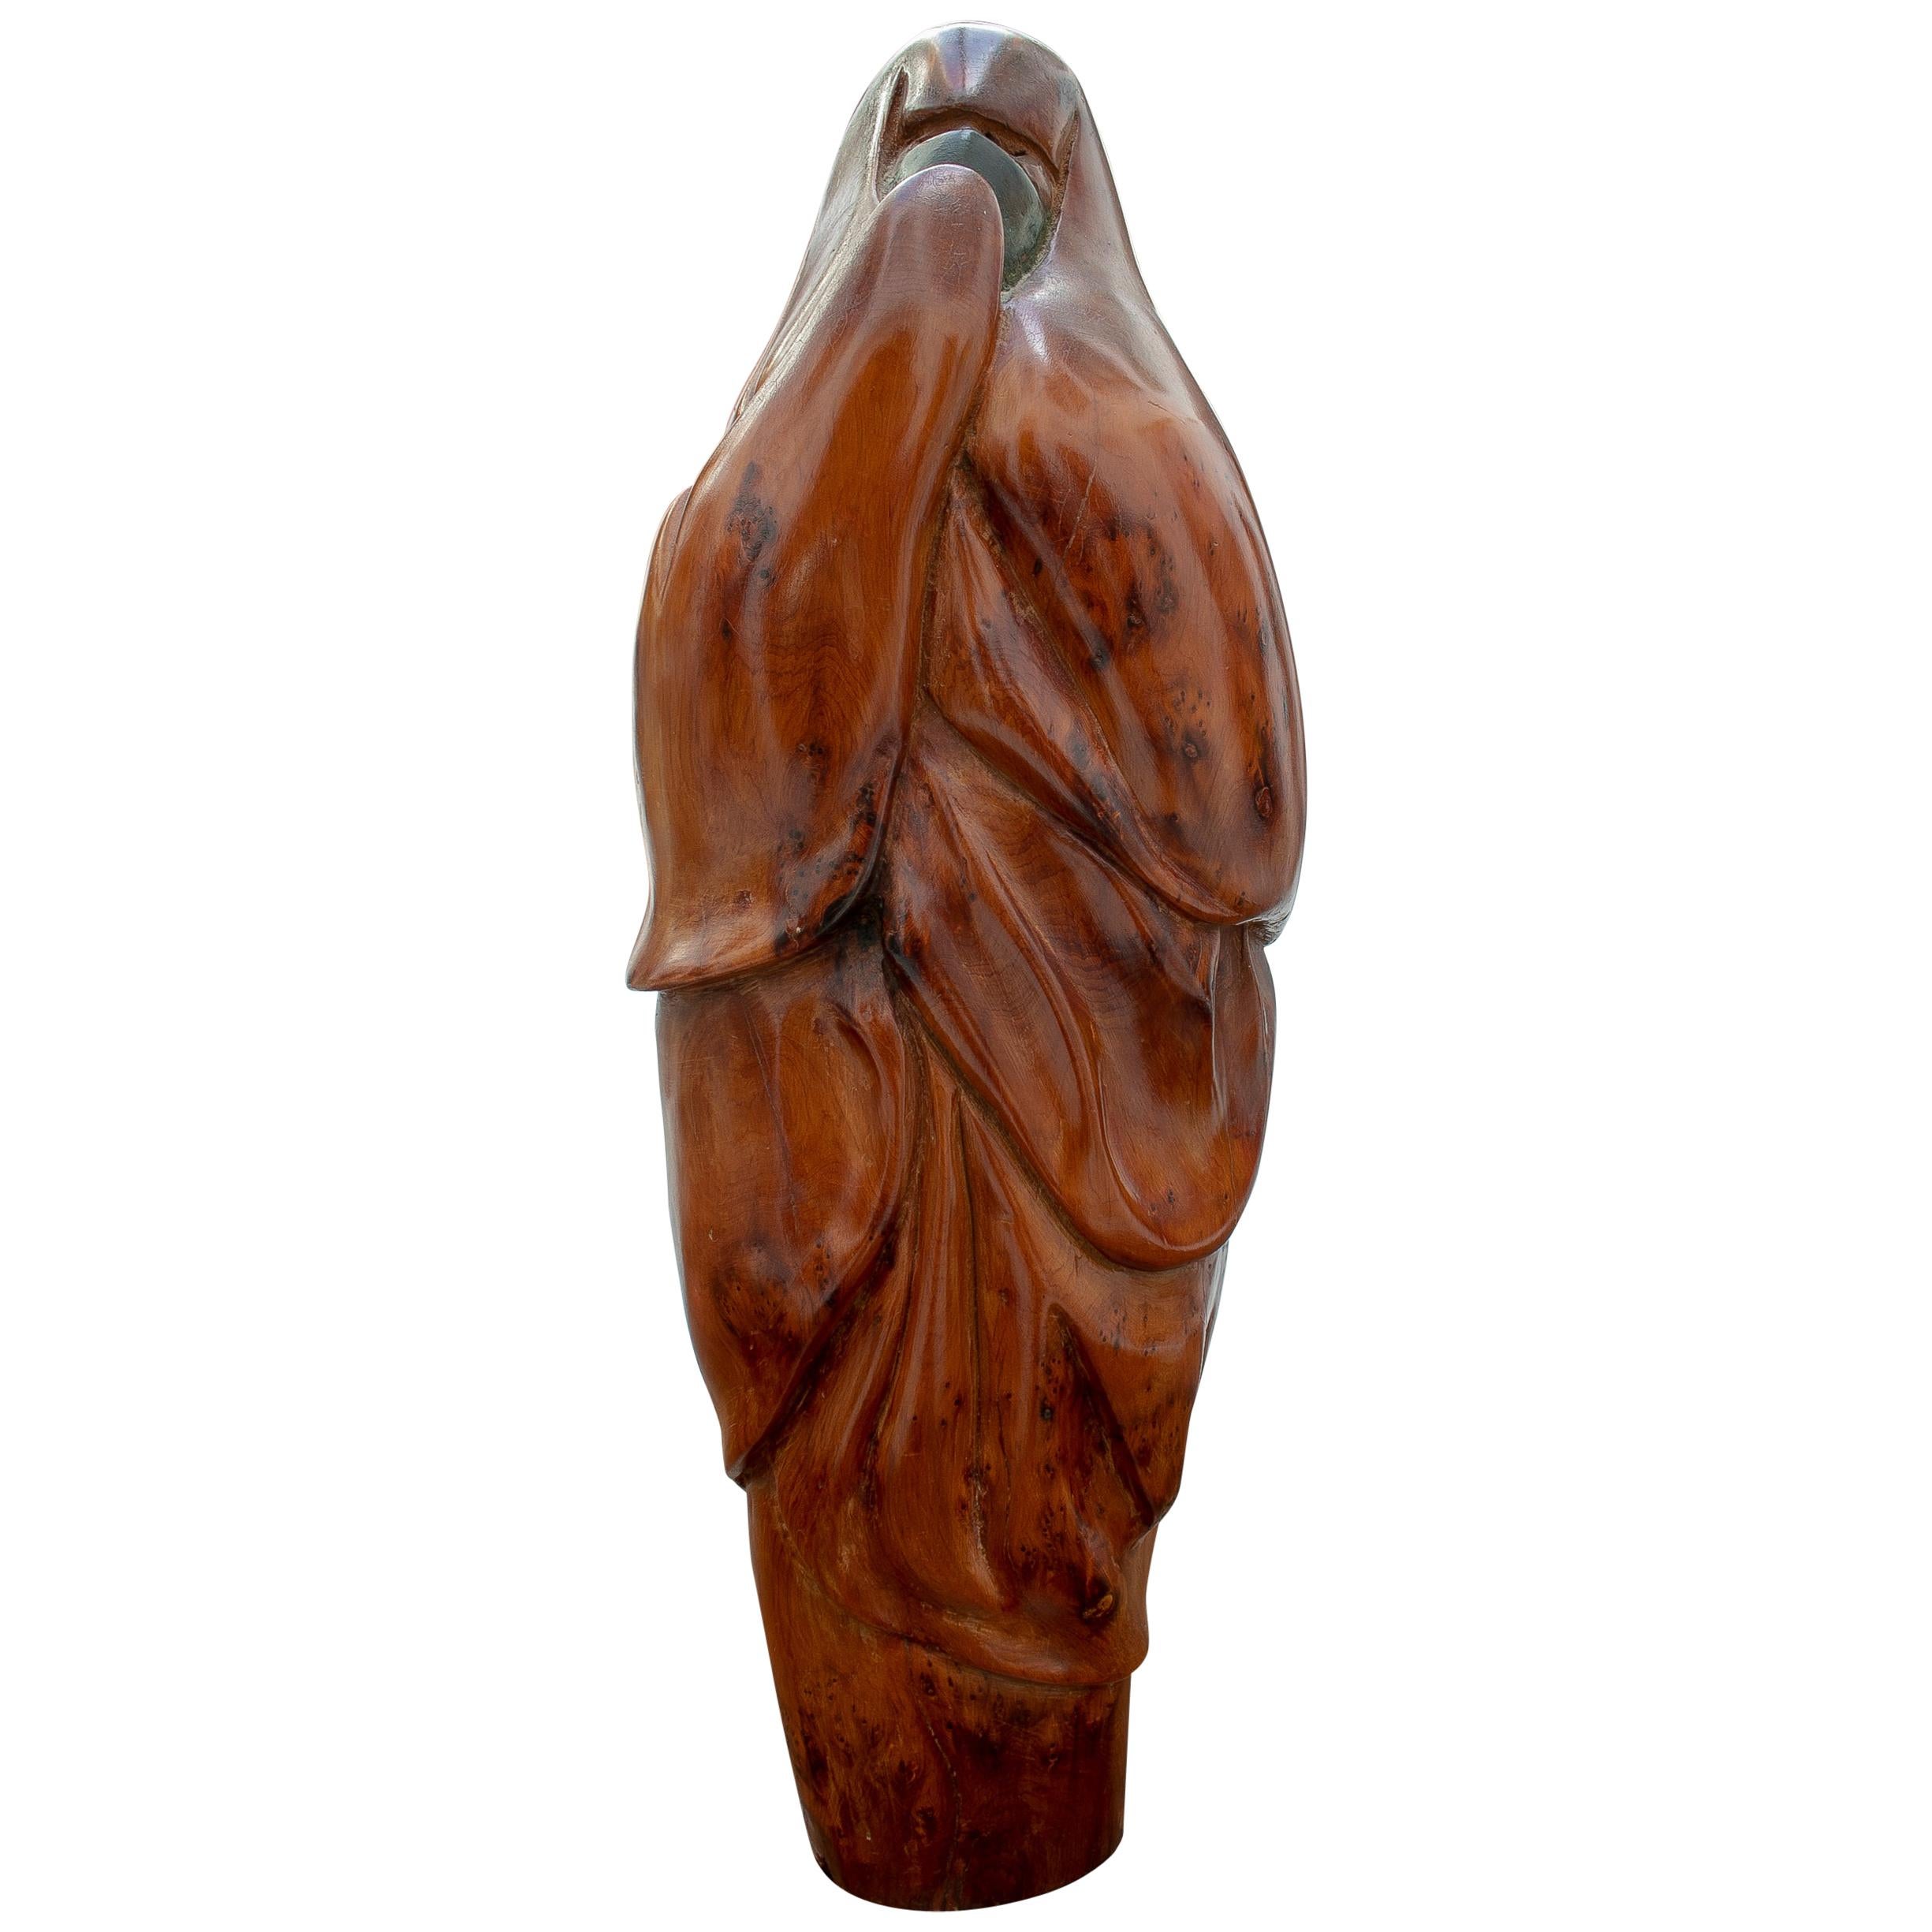 1950s French Fruitwood Abstract Figurative Sculpture of an Arab Woman with Niqab